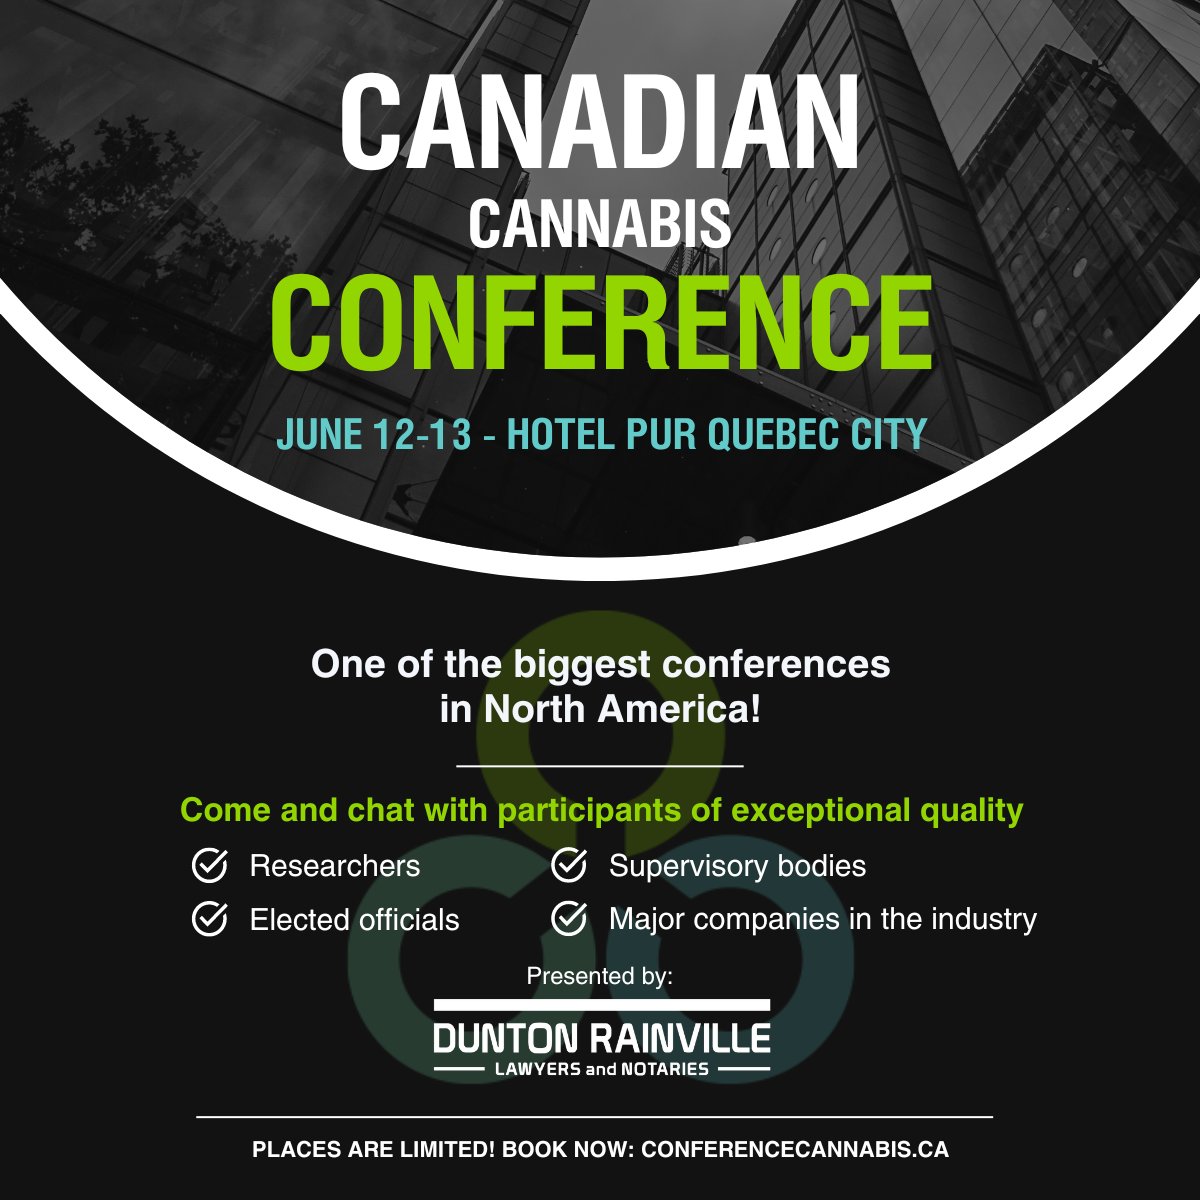 This year's Canadian Cannabis Conference comes at a pivotal time, with the USA set to reclassify cannabis and many other countries moving towards legalization. Places are limited, so book now: rb.gy/ioha0p